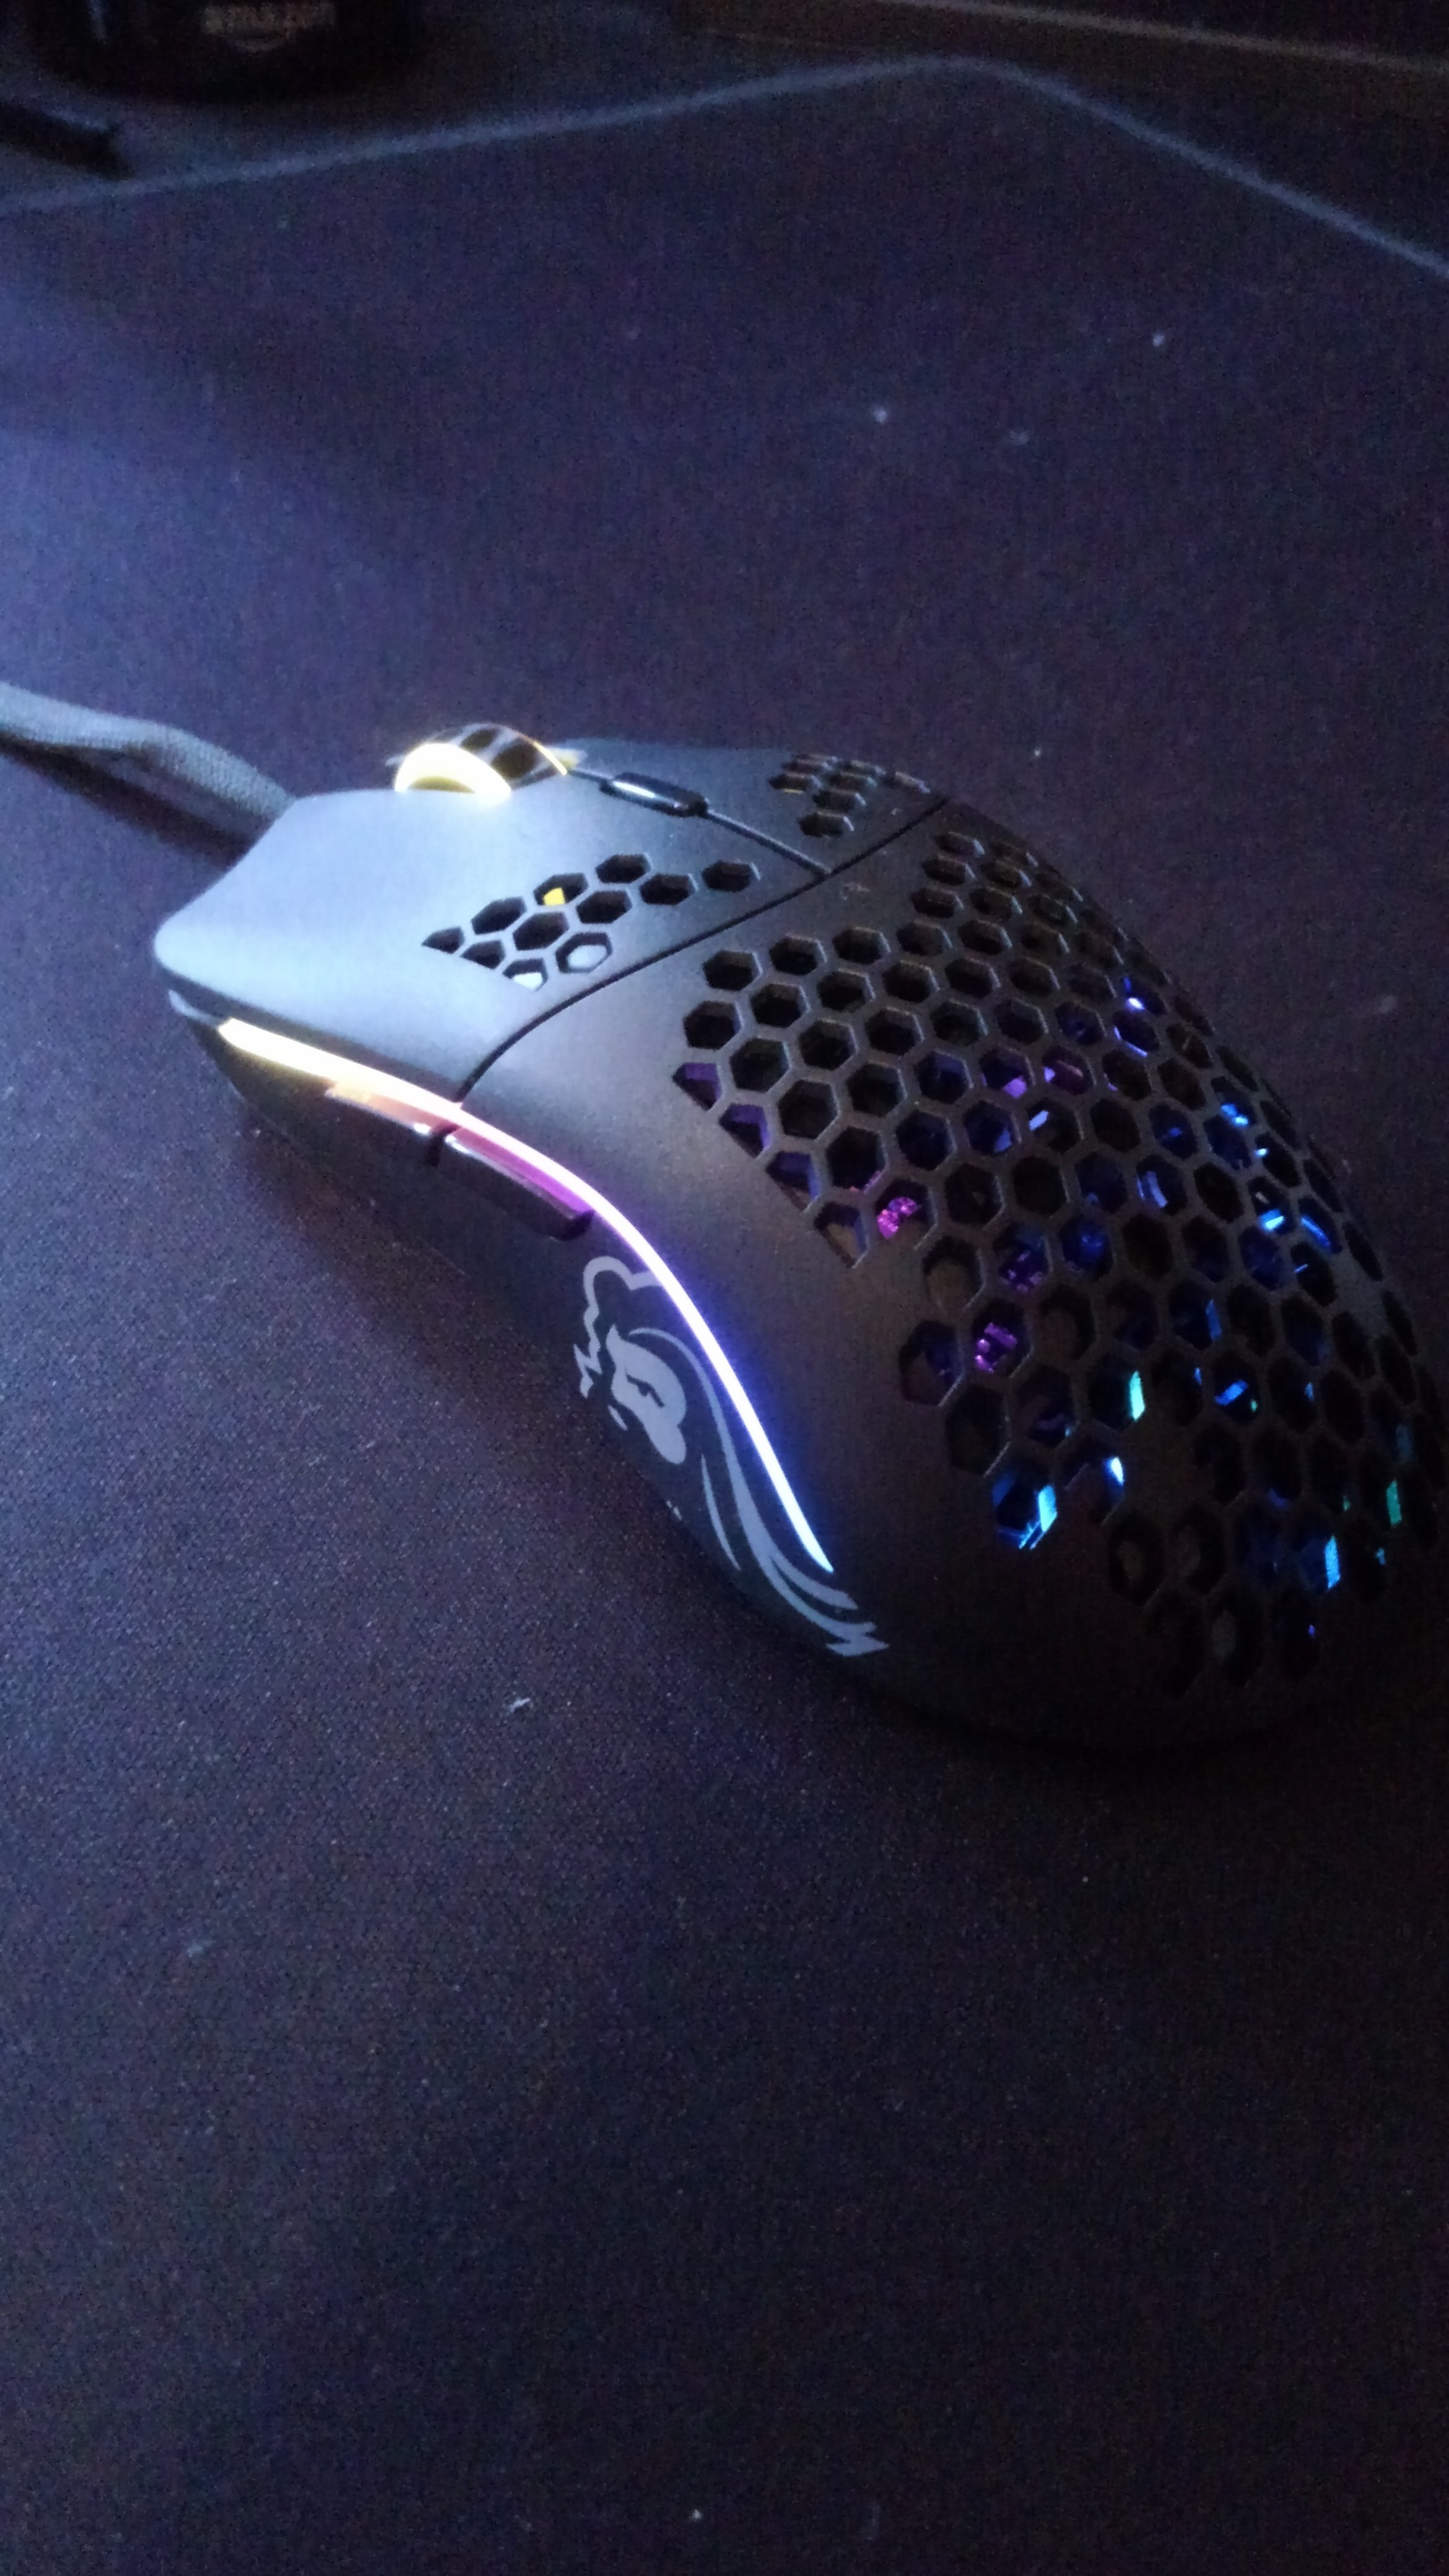 Glorious Model O Mouse Techpowerup Forums